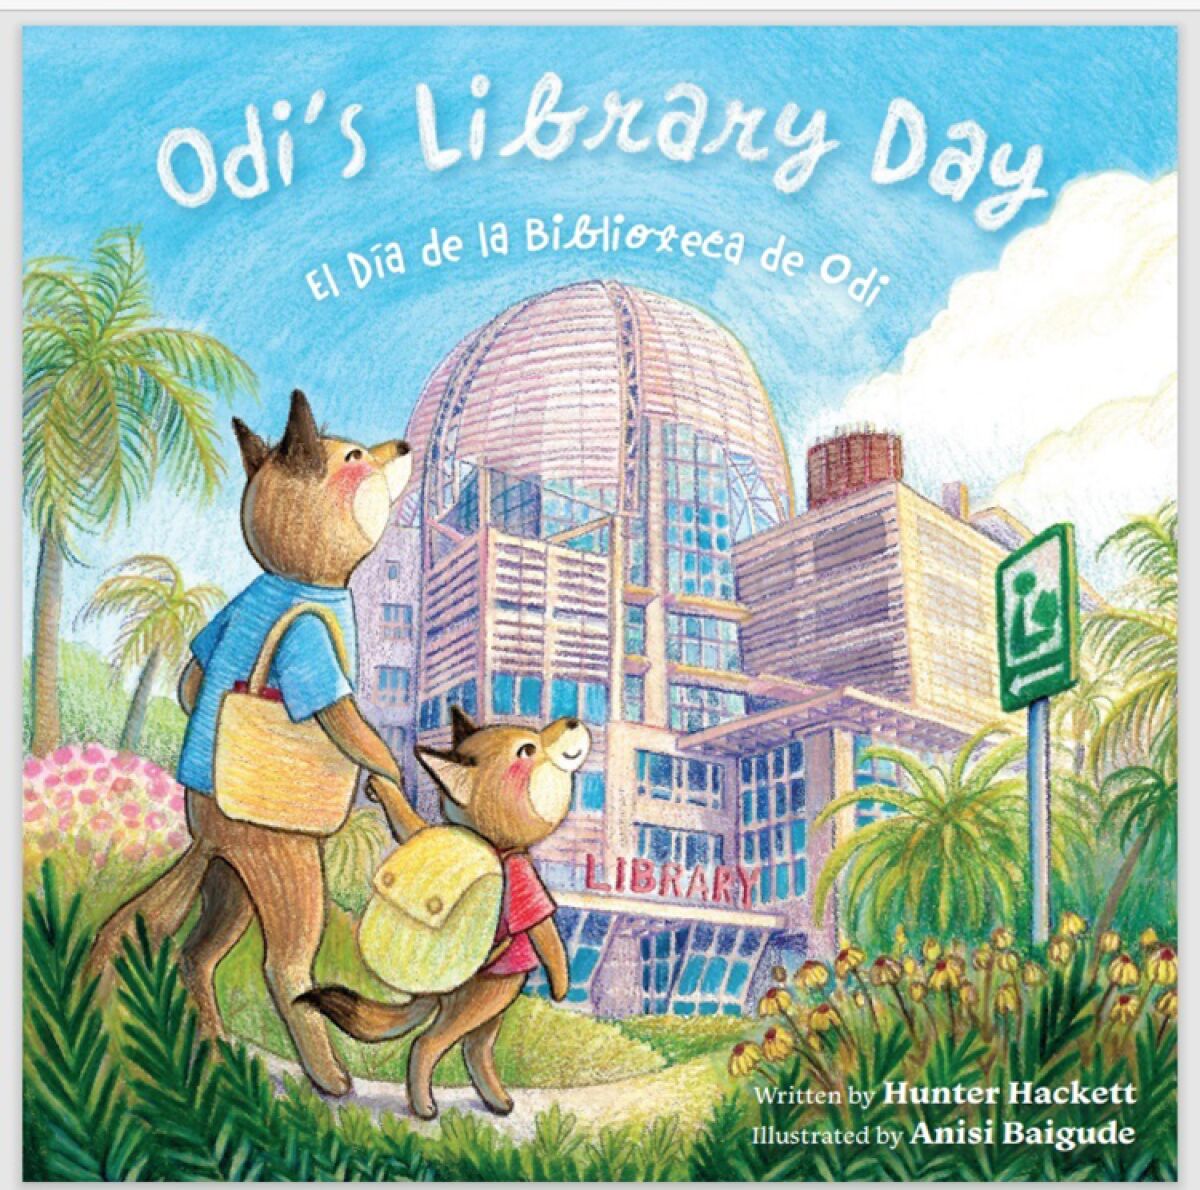 "Odi's Library Day," written by Hunter Hackett and illustrated by Anisi Baigude